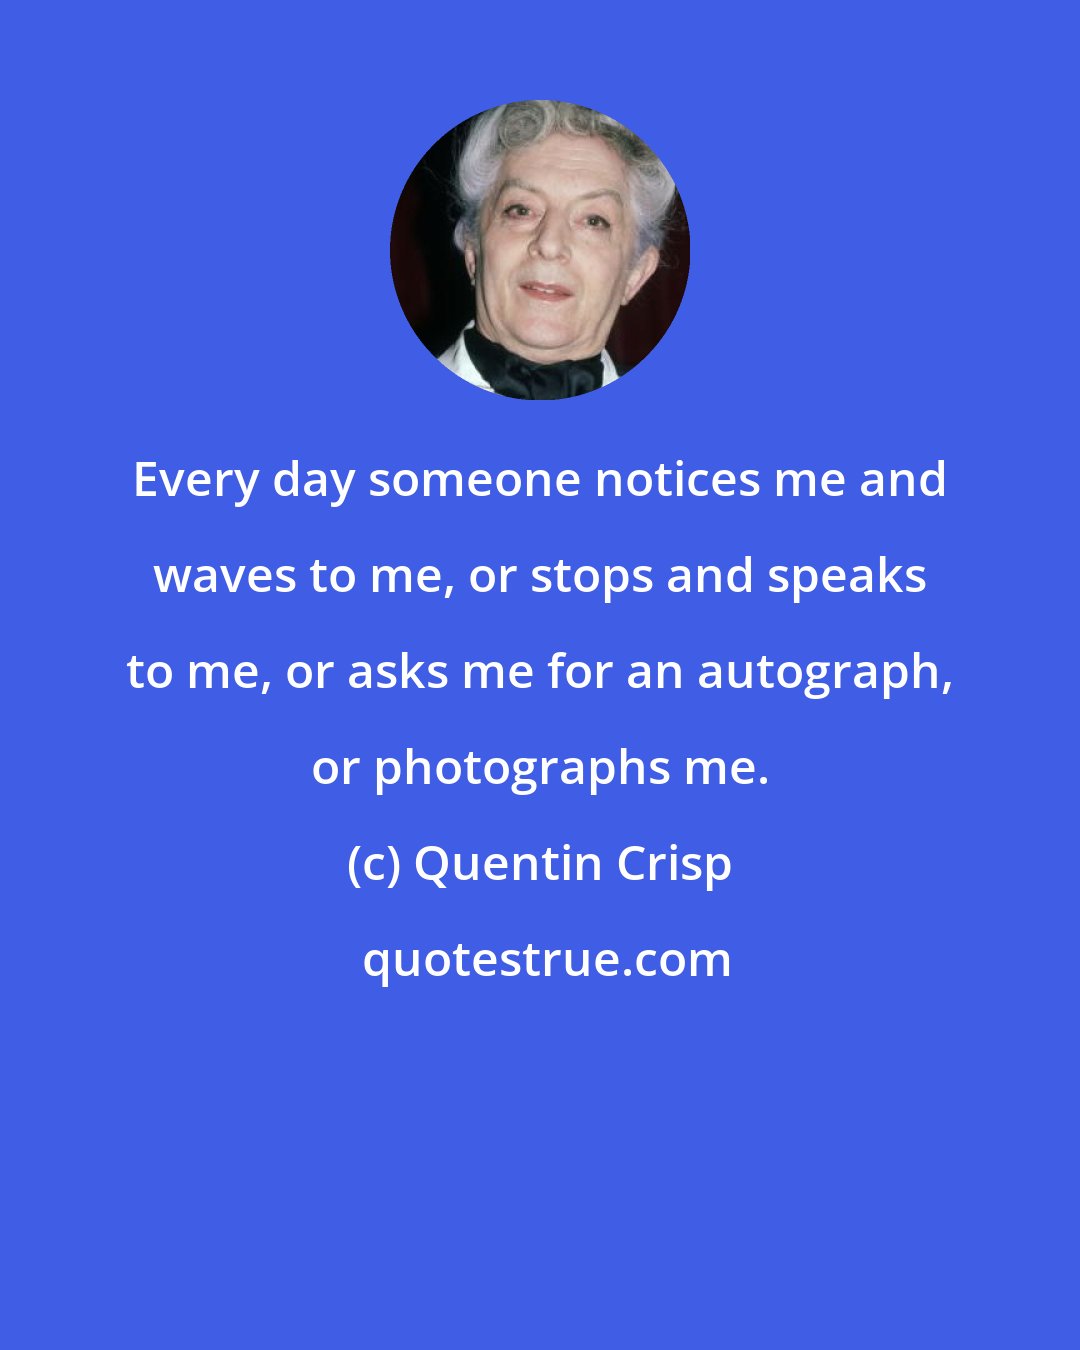 Quentin Crisp: Every day someone notices me and waves to me, or stops and speaks to me, or asks me for an autograph, or photographs me.